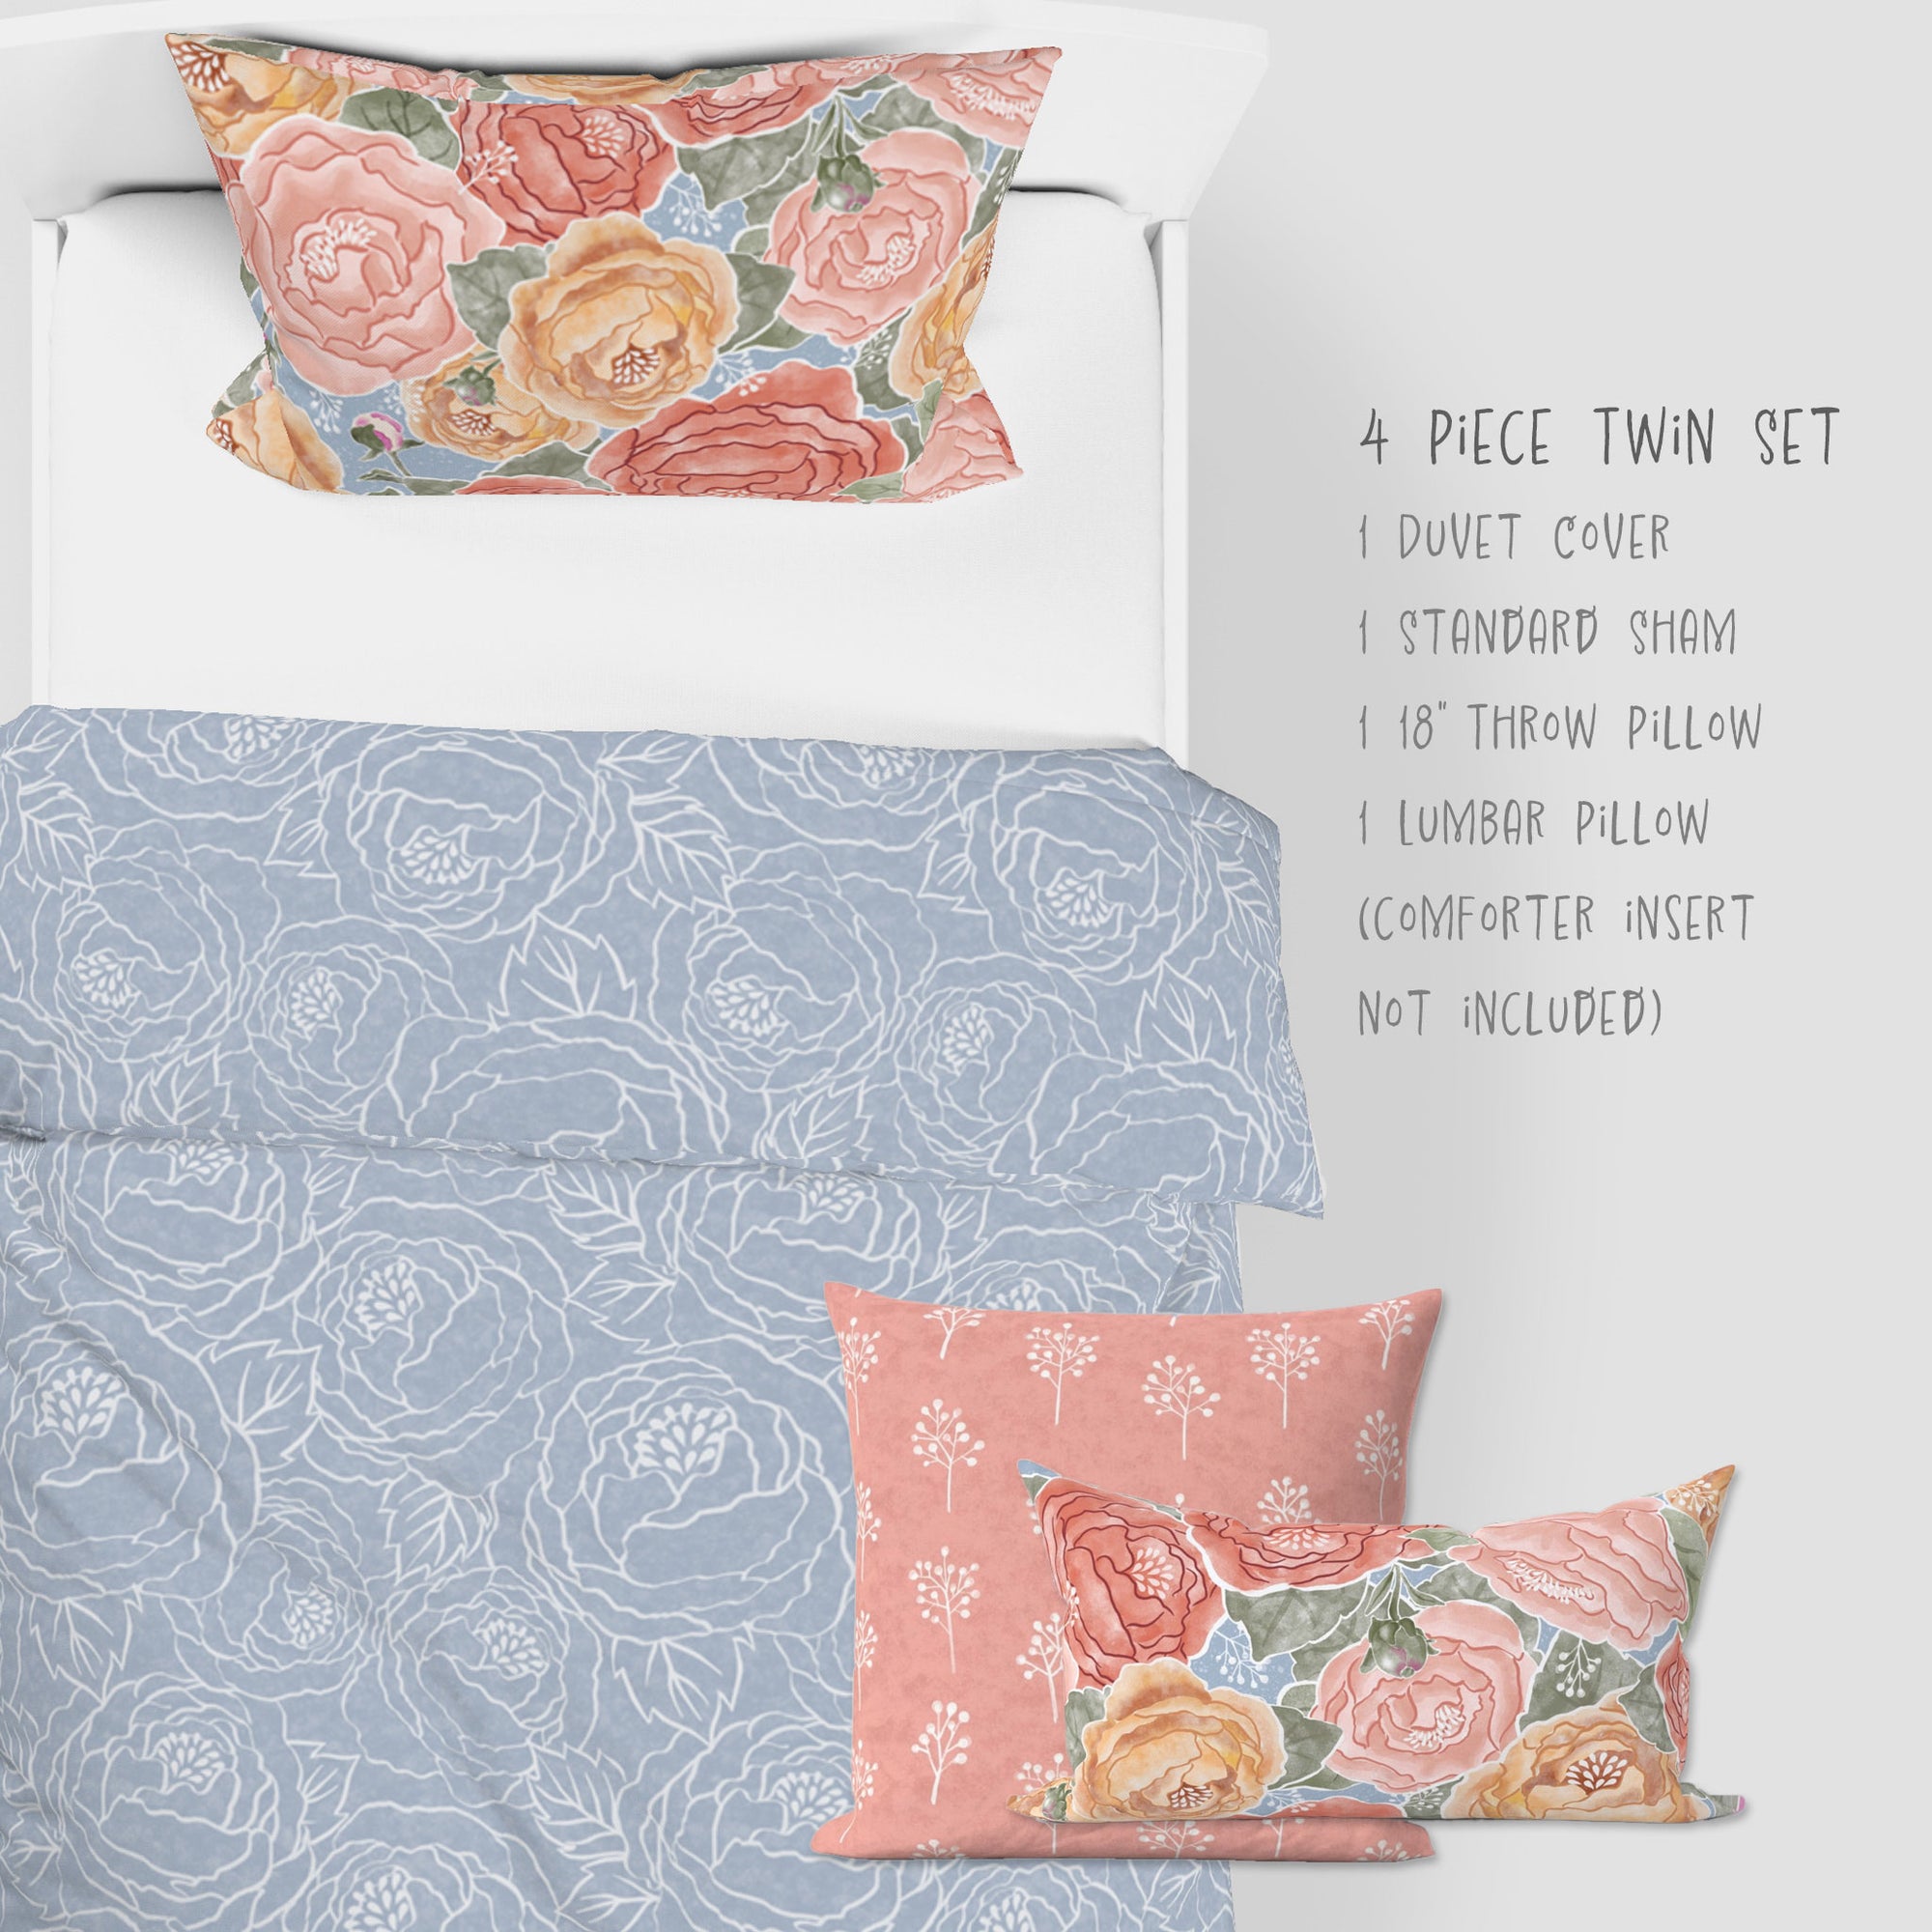 4 Piece Sets for Twin sizes - Pretty In Peony Line on Blue comes with Duvet cover, one Sham, 1 18” Throw Pillows and 1 Lumbar Pillow